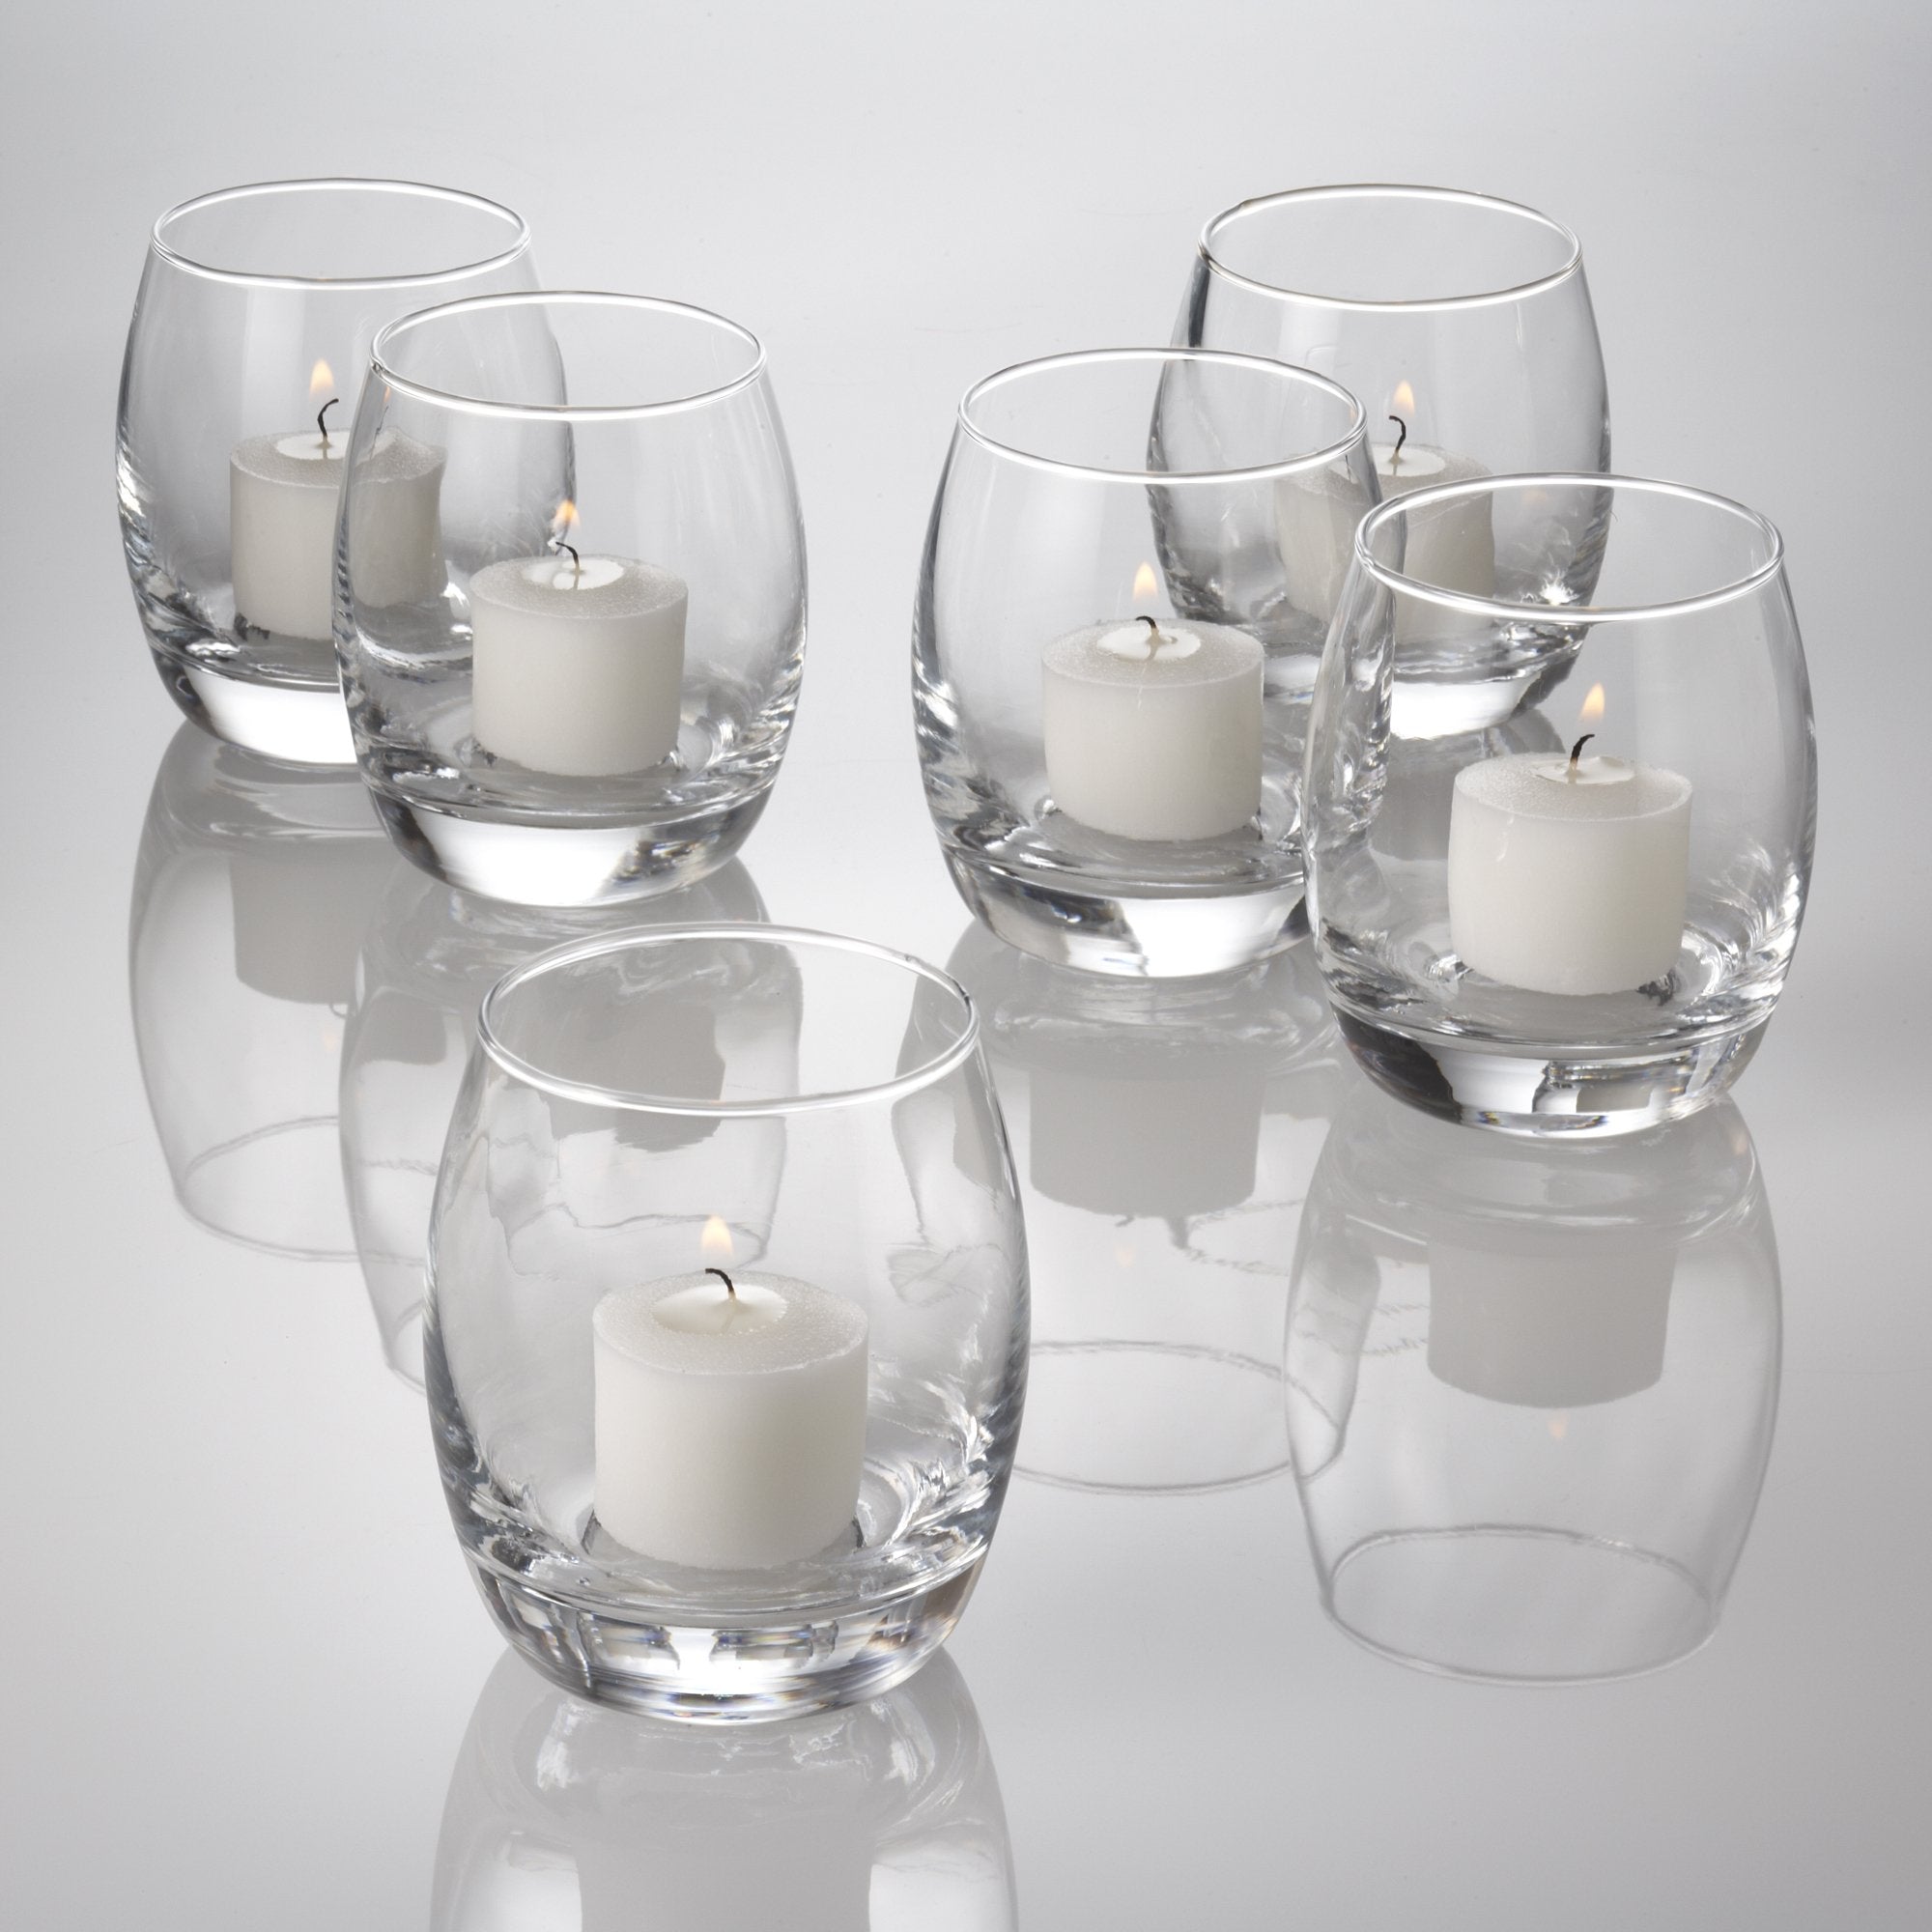 votive candles and holders